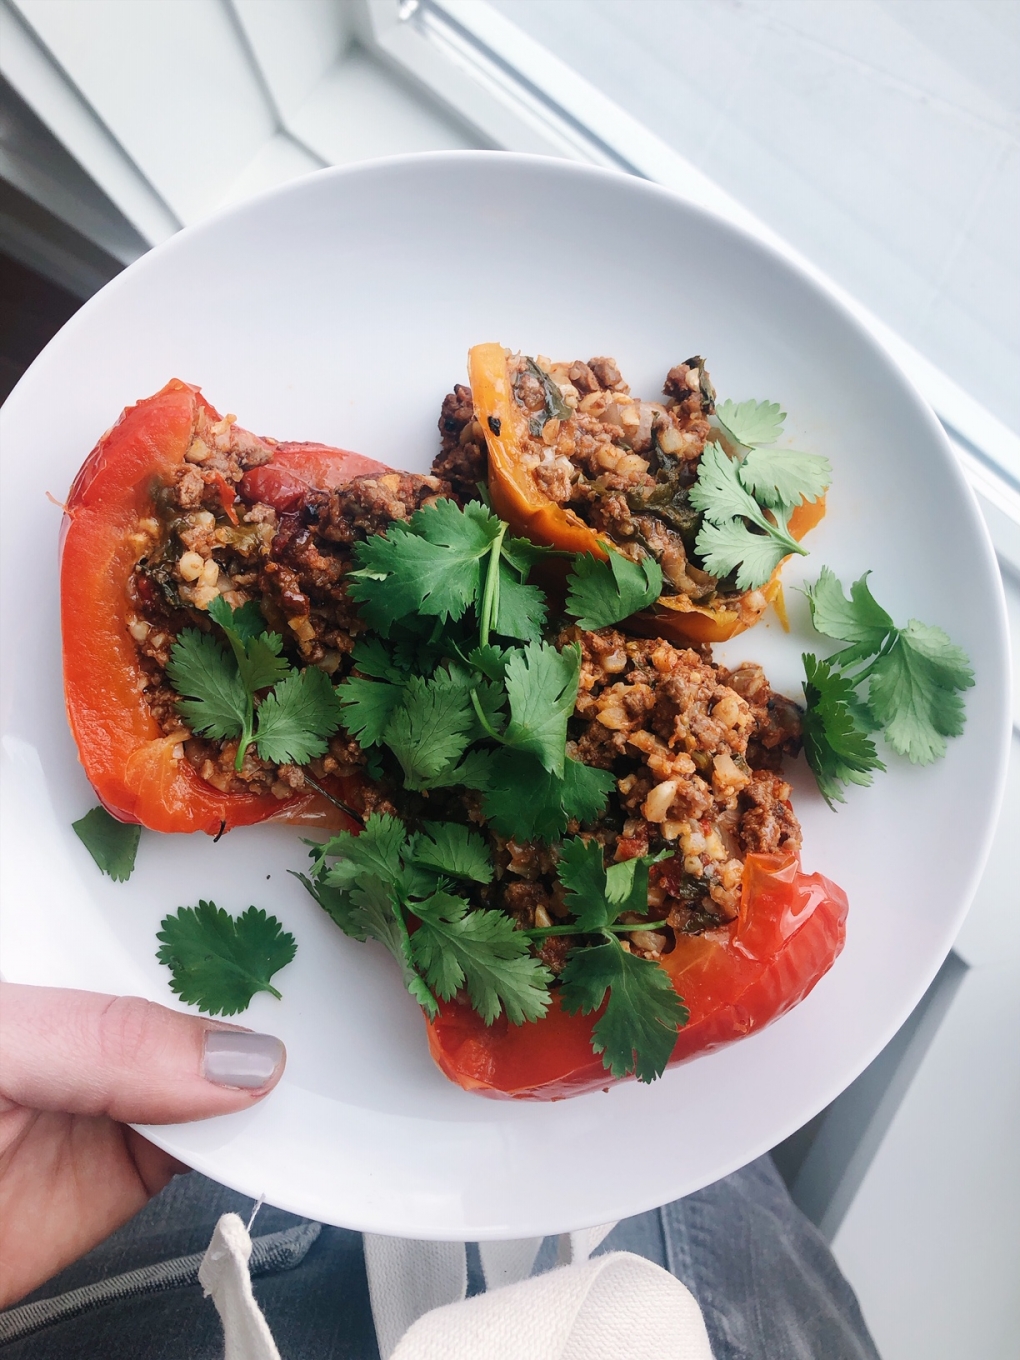 Roasted red and orange peppers with ground beef, cauilflower rice, and topped with fresh herbs on a white plate by the window